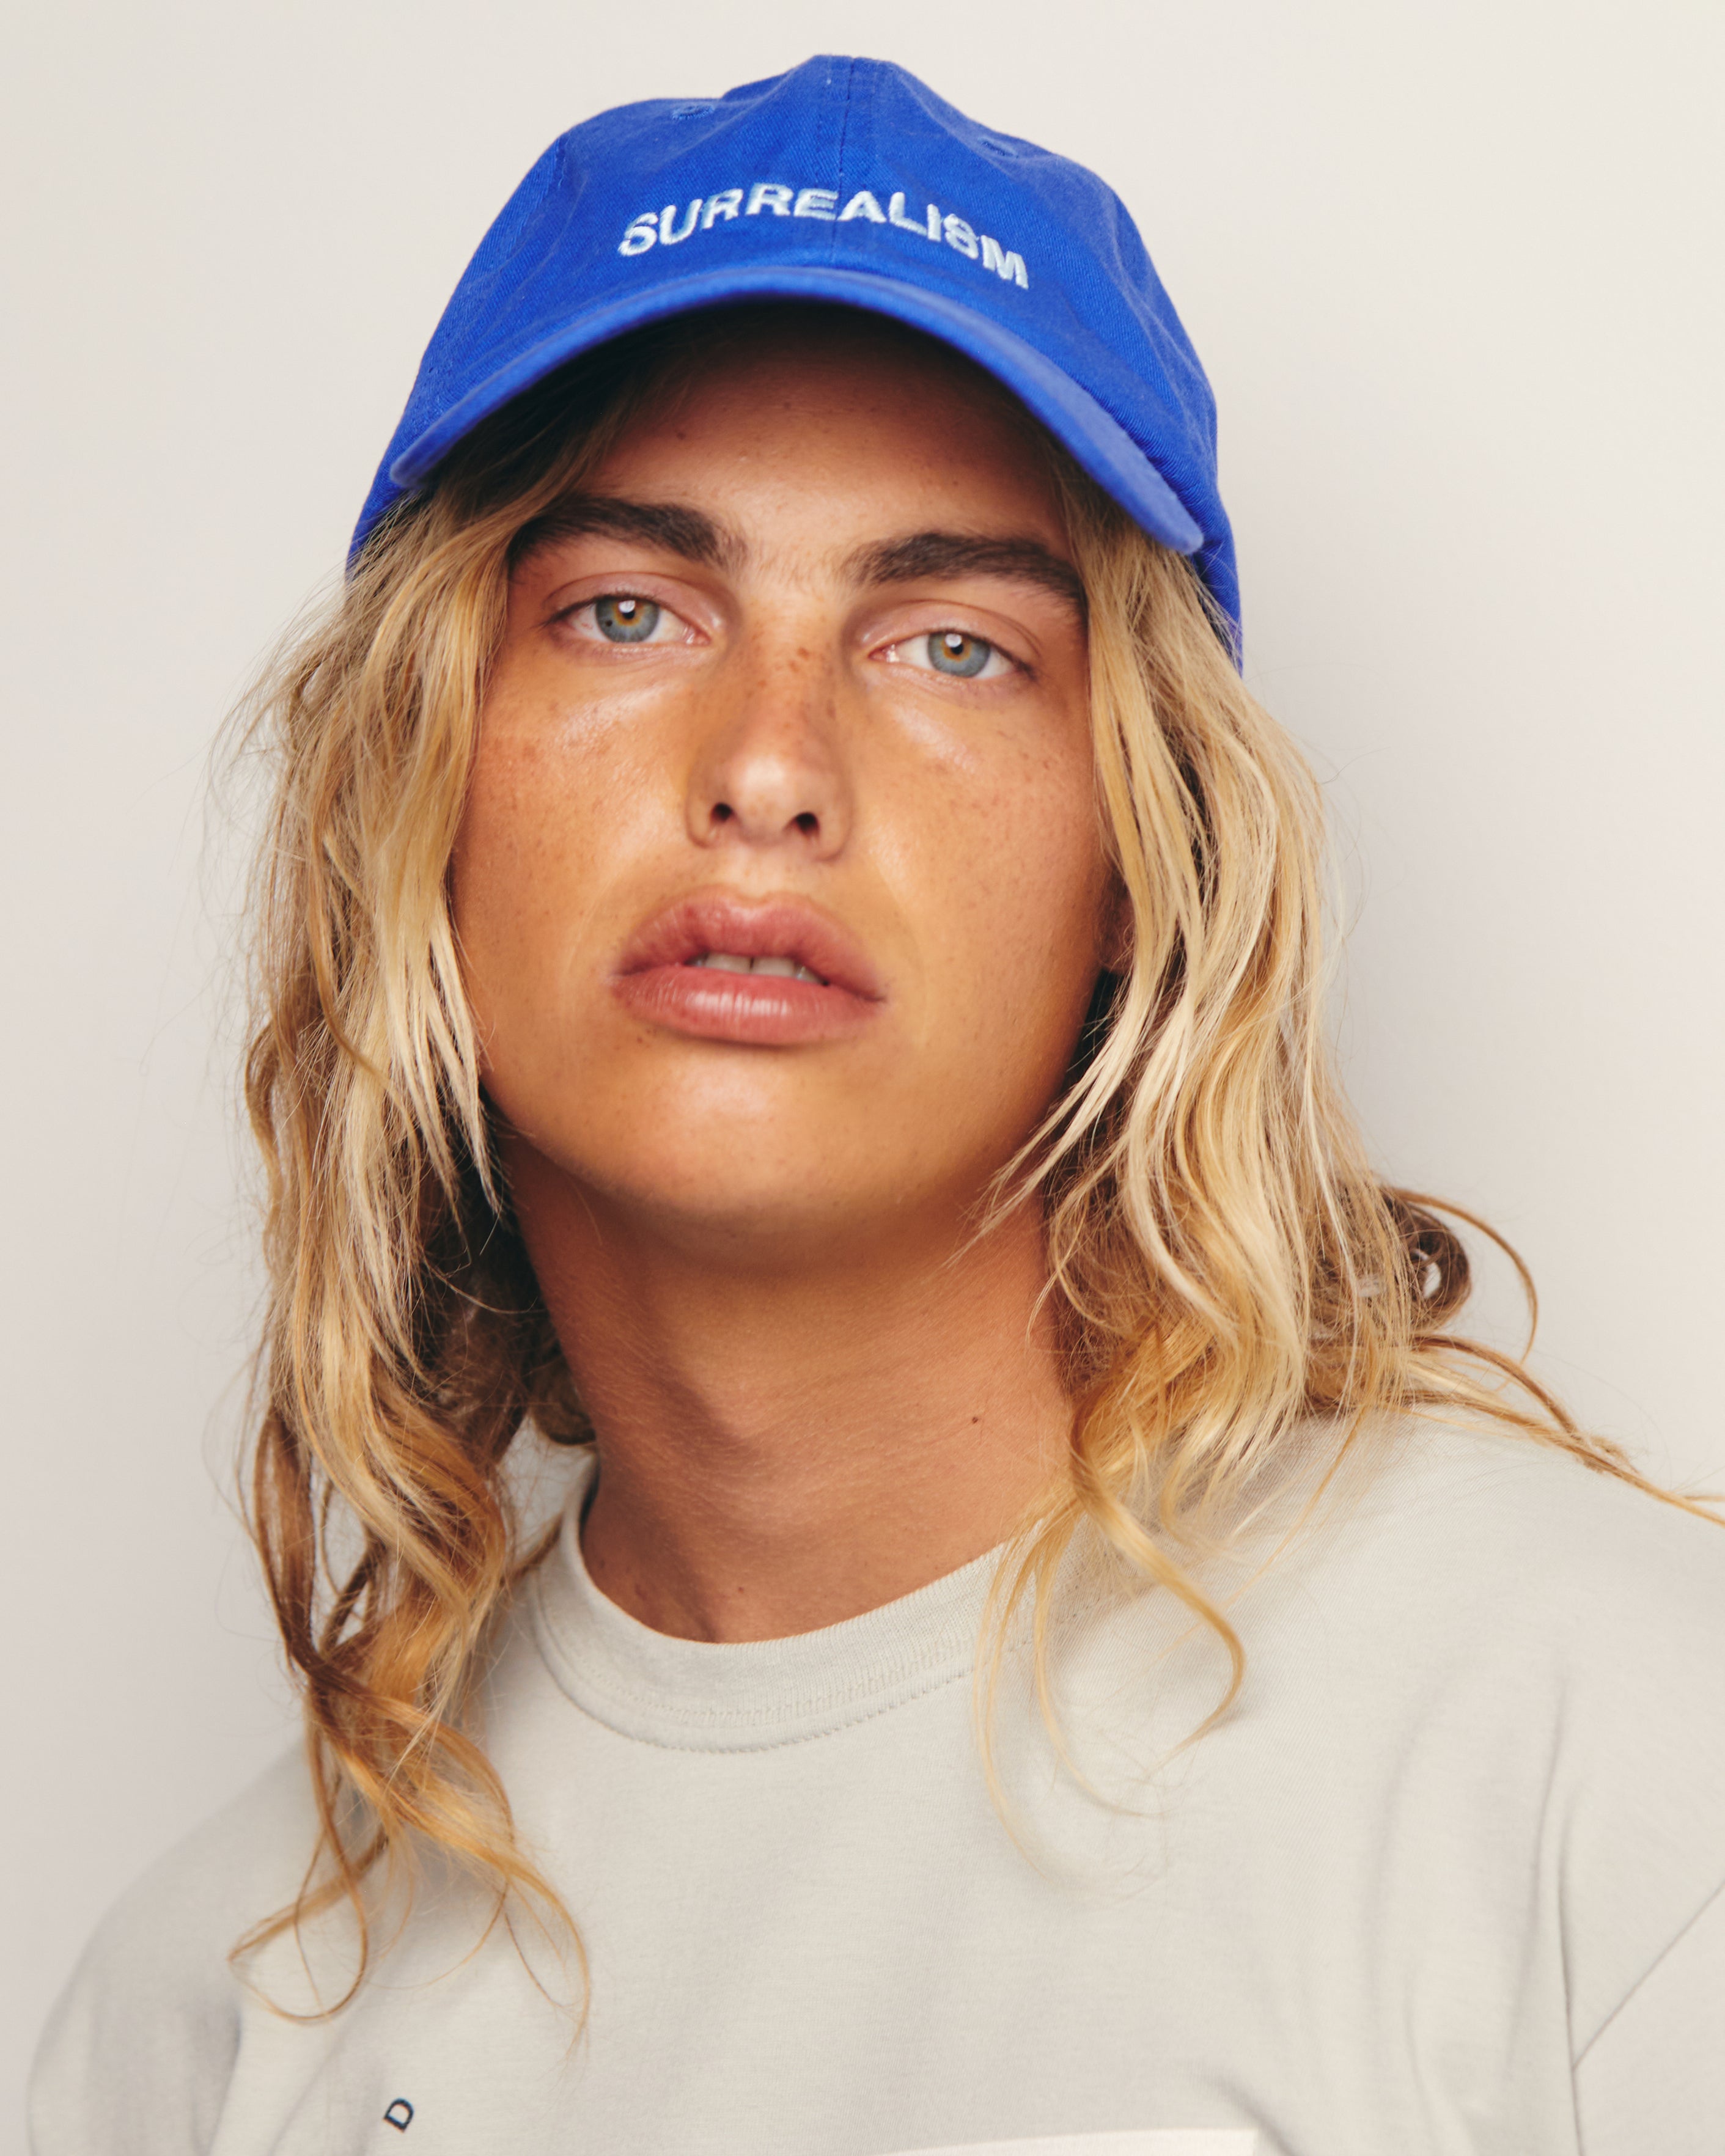 Lucas Ucedo Wears Royal Blue Dad Hat With Surrealism Embroidery Art Movement Text